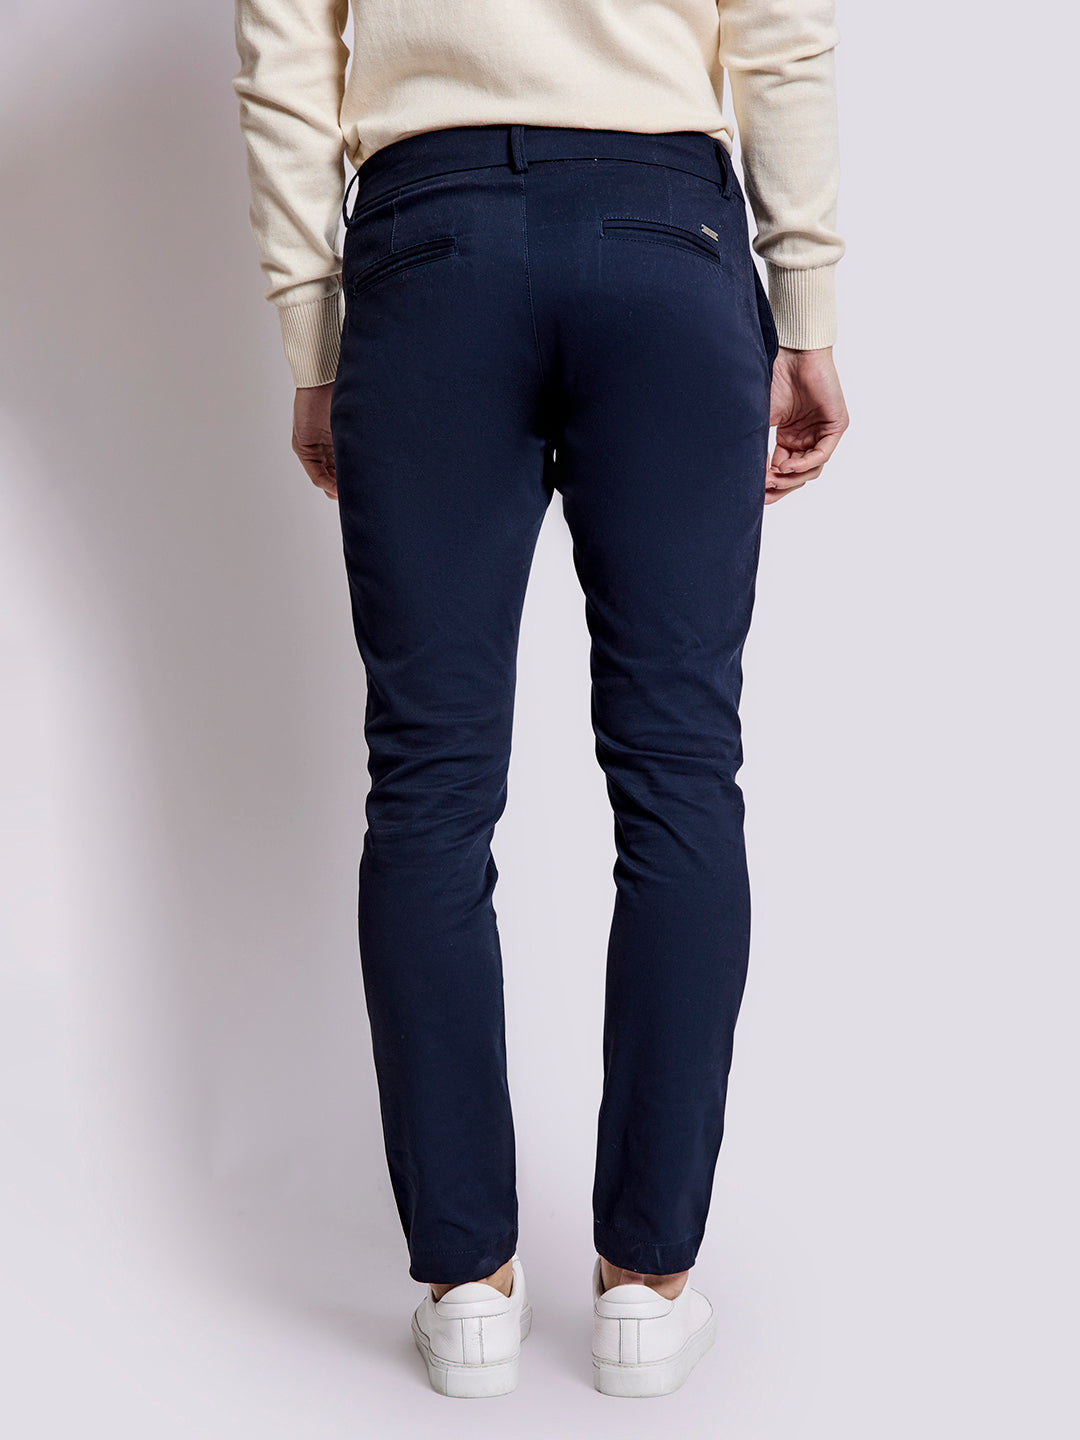 Peter England Casuals Blue Skinny Fit Trousers